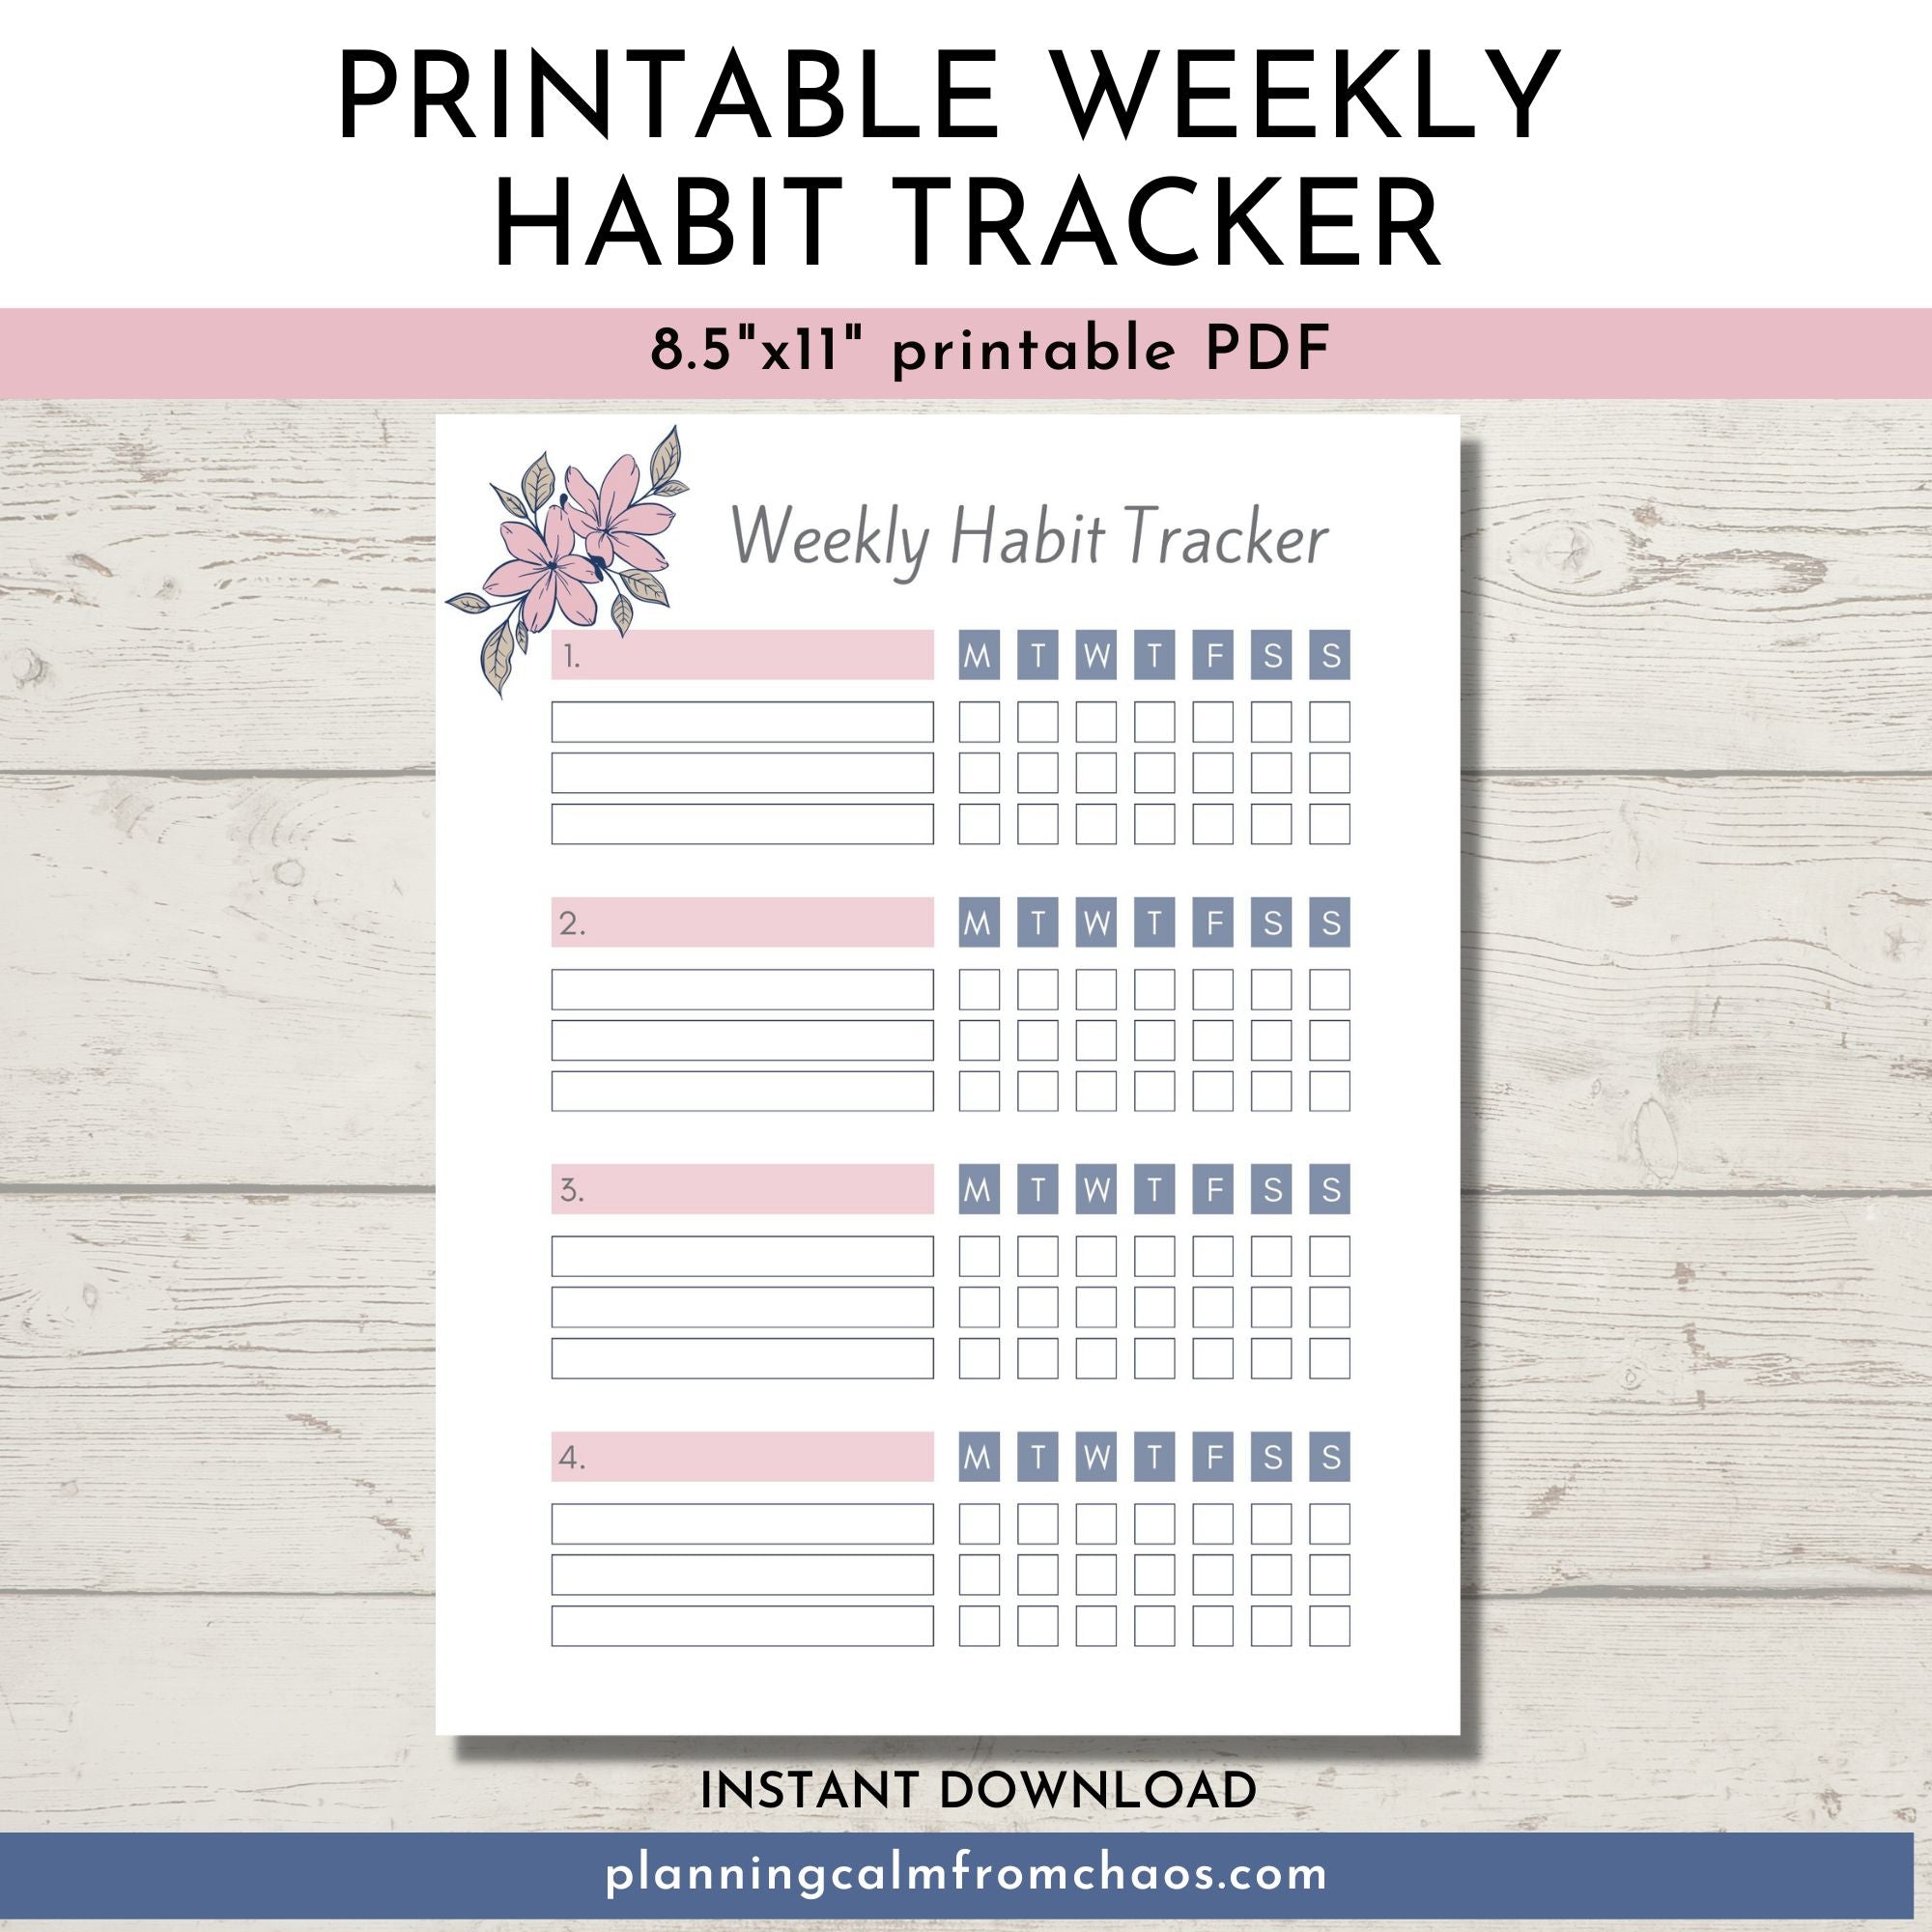 Printable Weekly Habit Tracker Planning Calm From Chaos